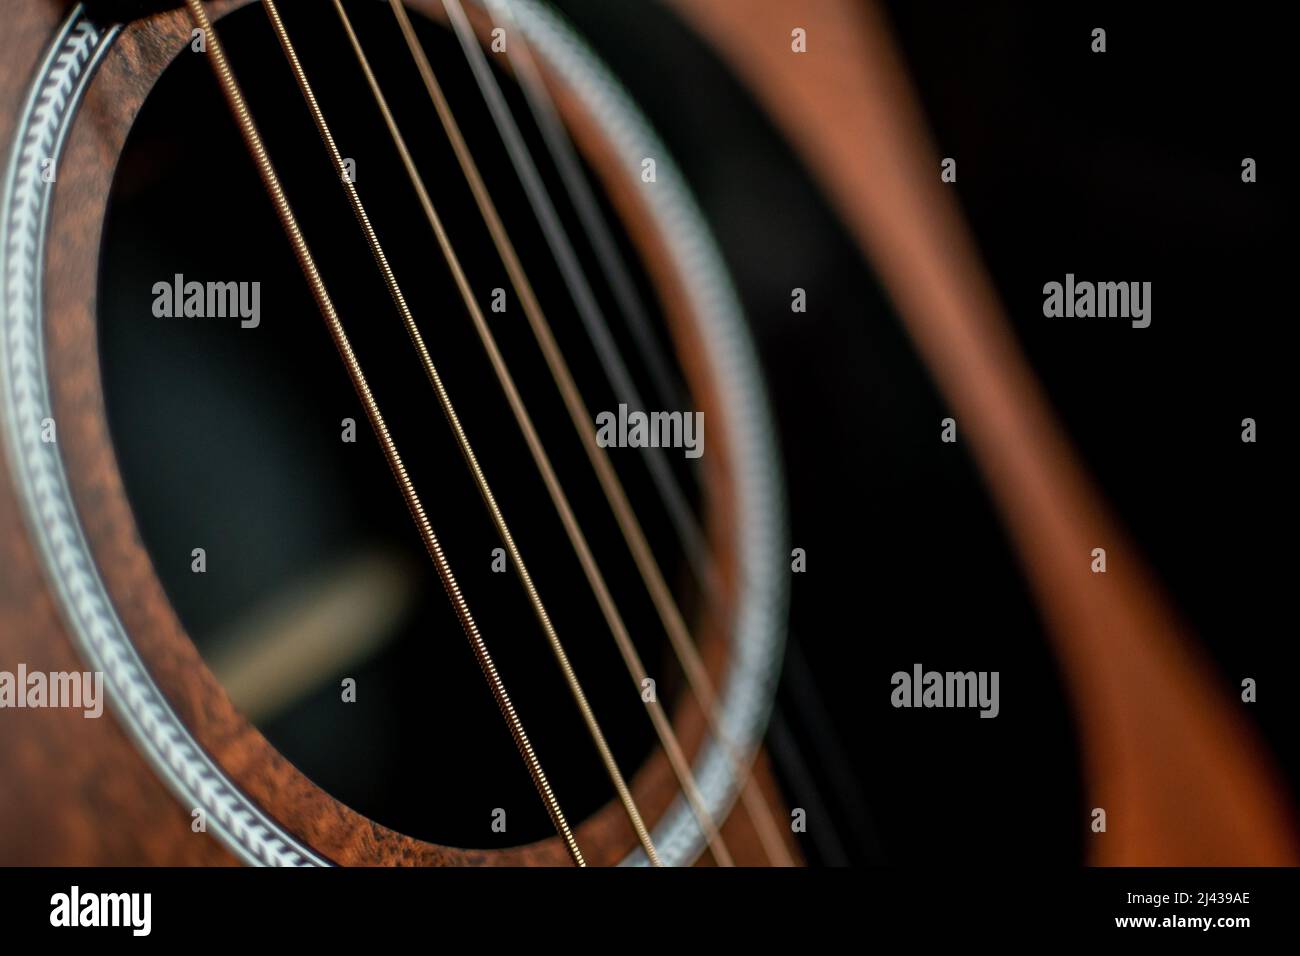 An angled close-up view of the sound hole and steel strings of an acoustic guitar. Stock Photo